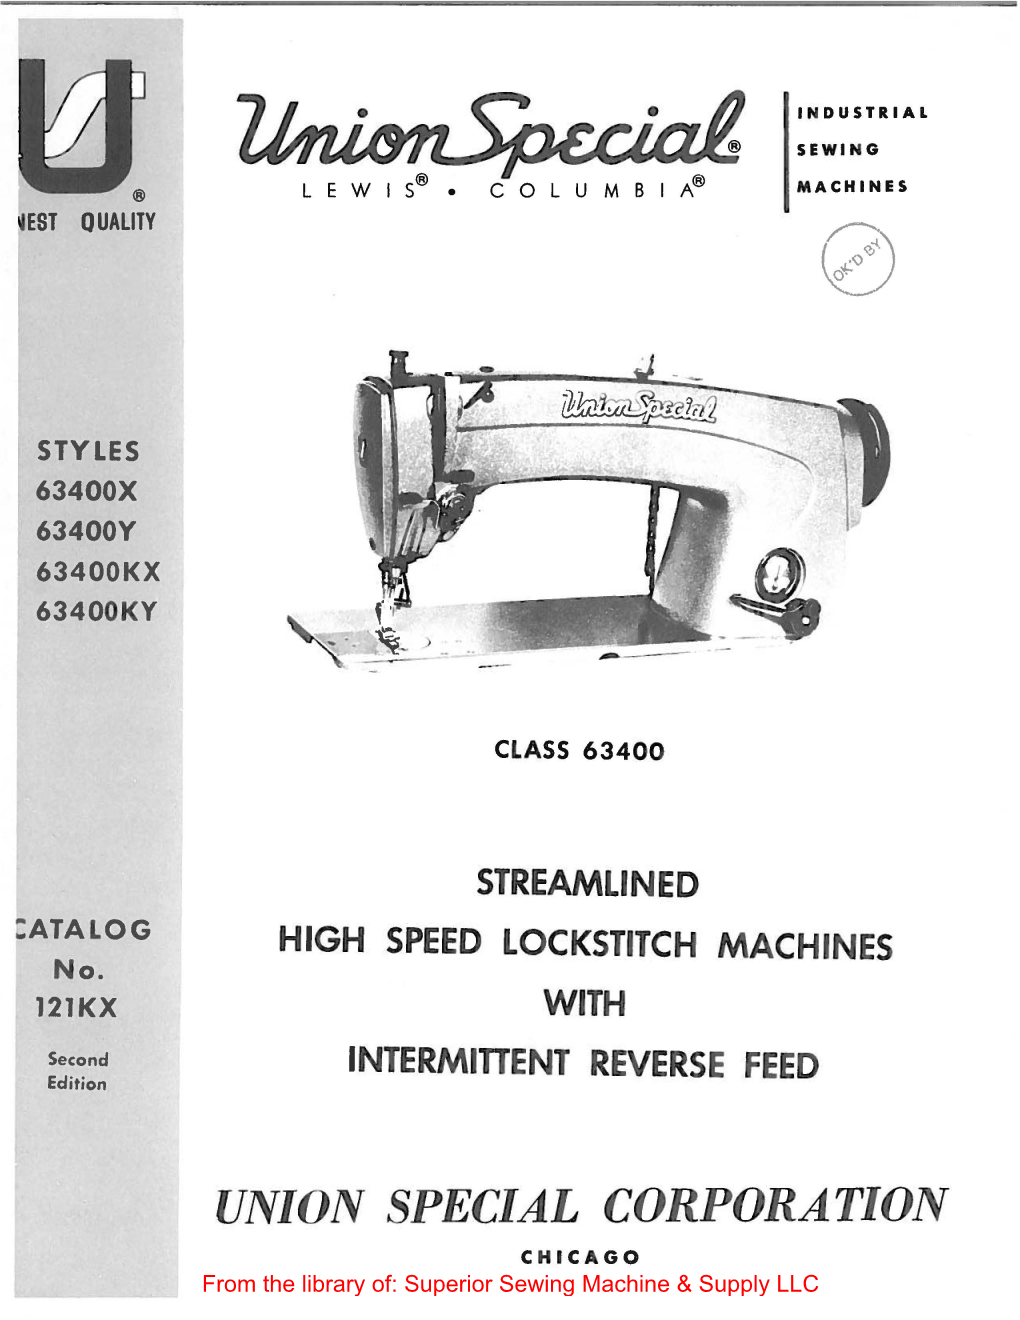 UNION SPECIAL CORPORATION C H ICAGO from the Library Of: Superior Sewing Machine & Supply LLC Catalog No